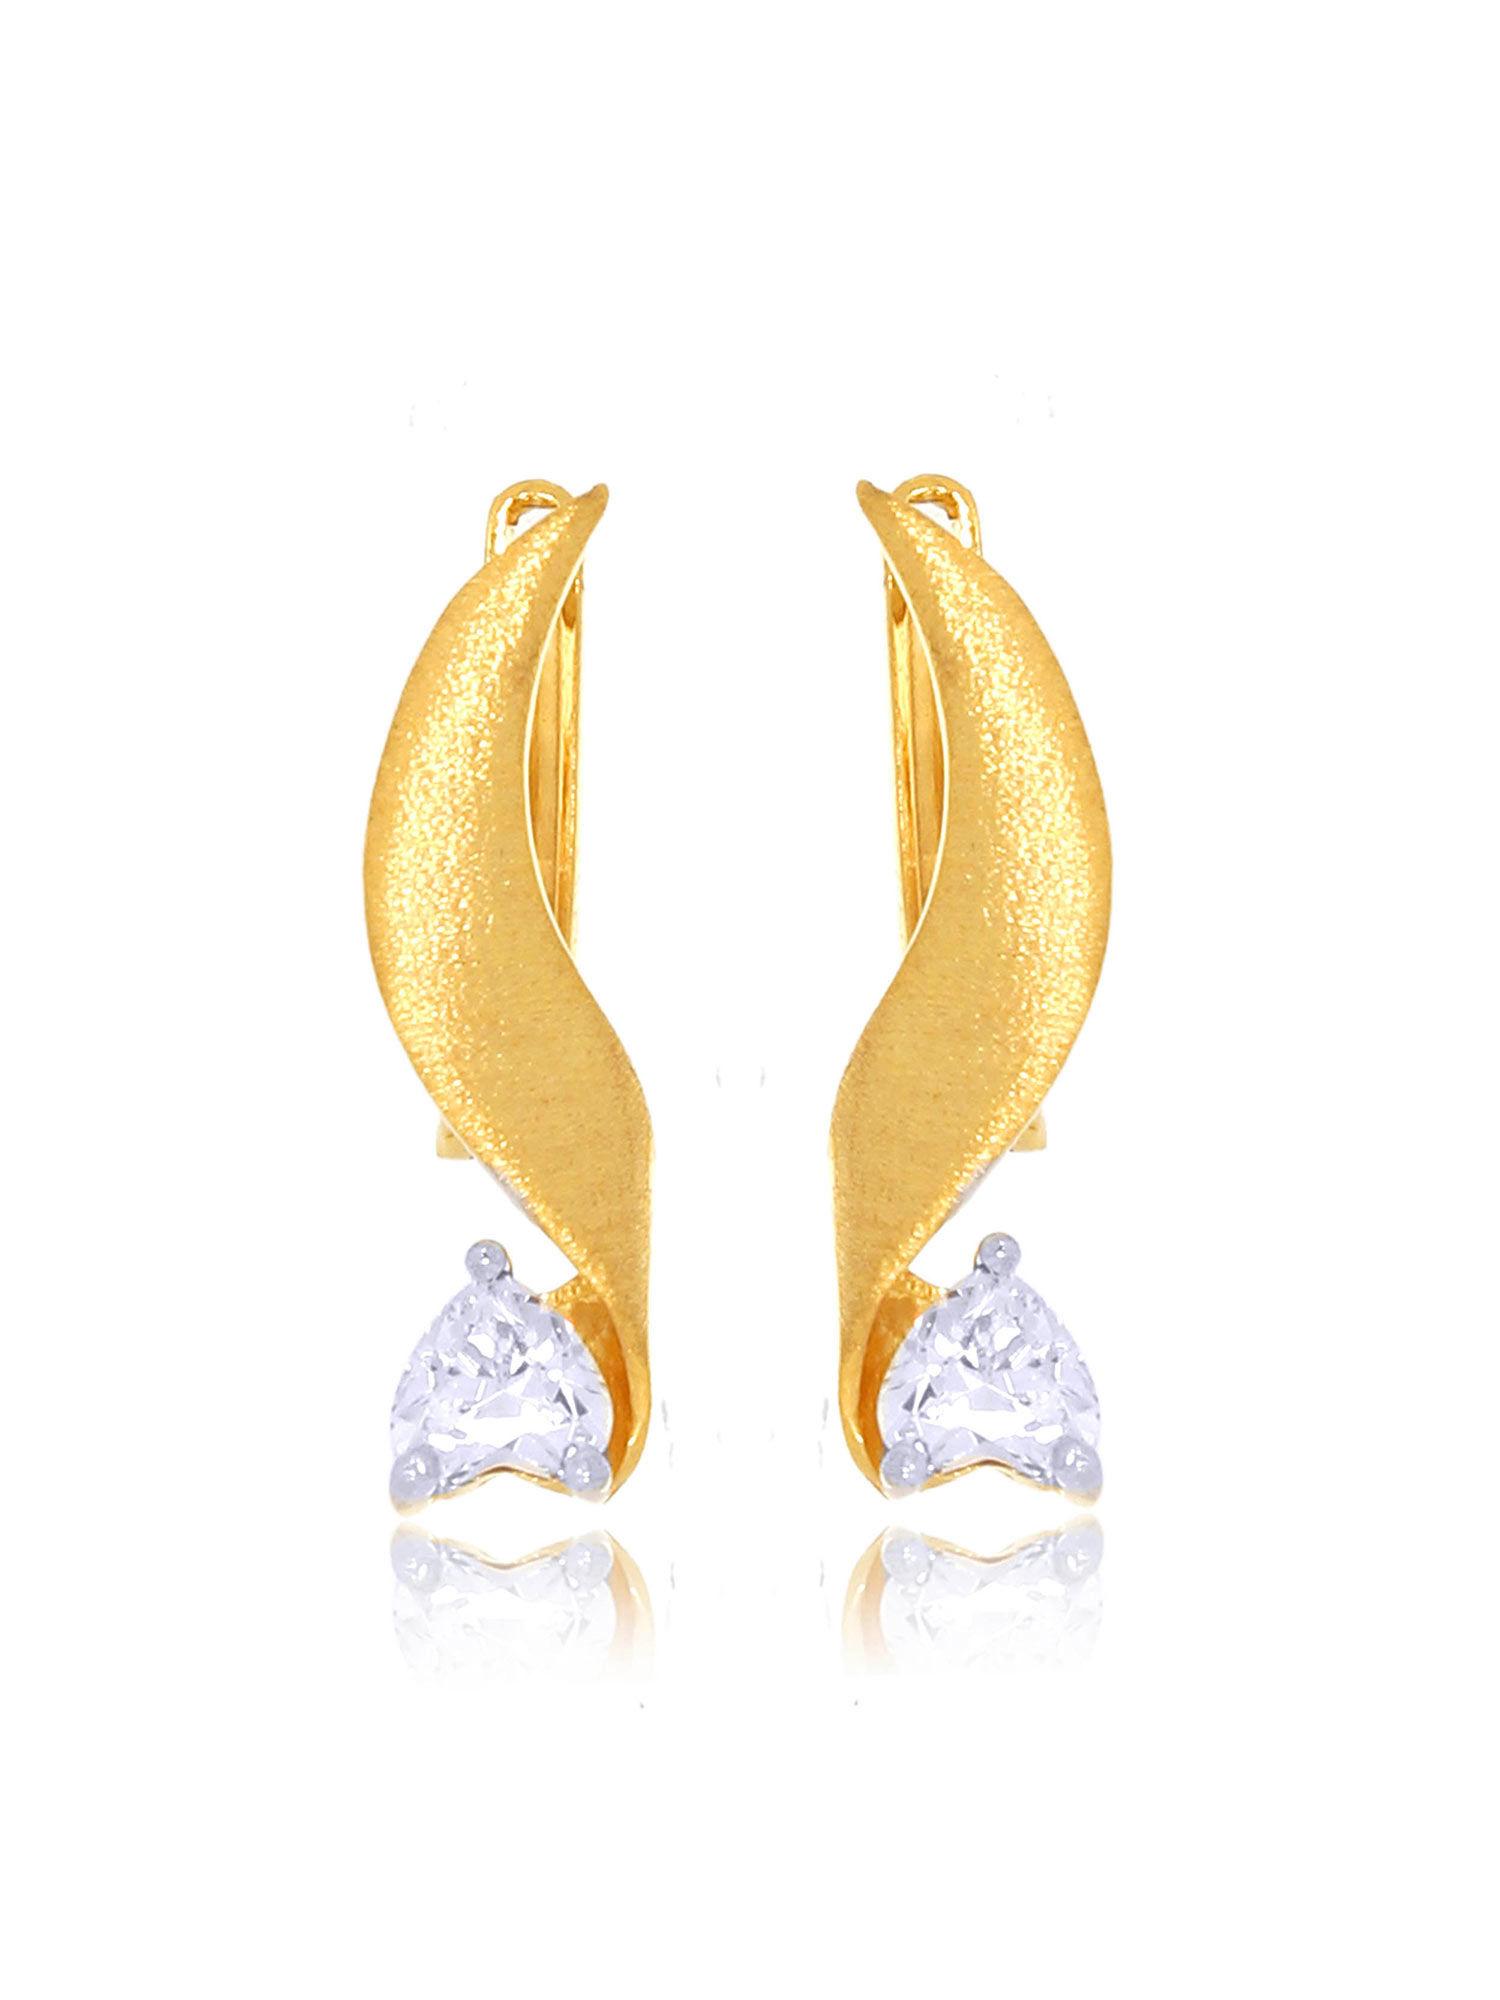 gold 22k yellow gold curvy deco gold hoop studs earrings